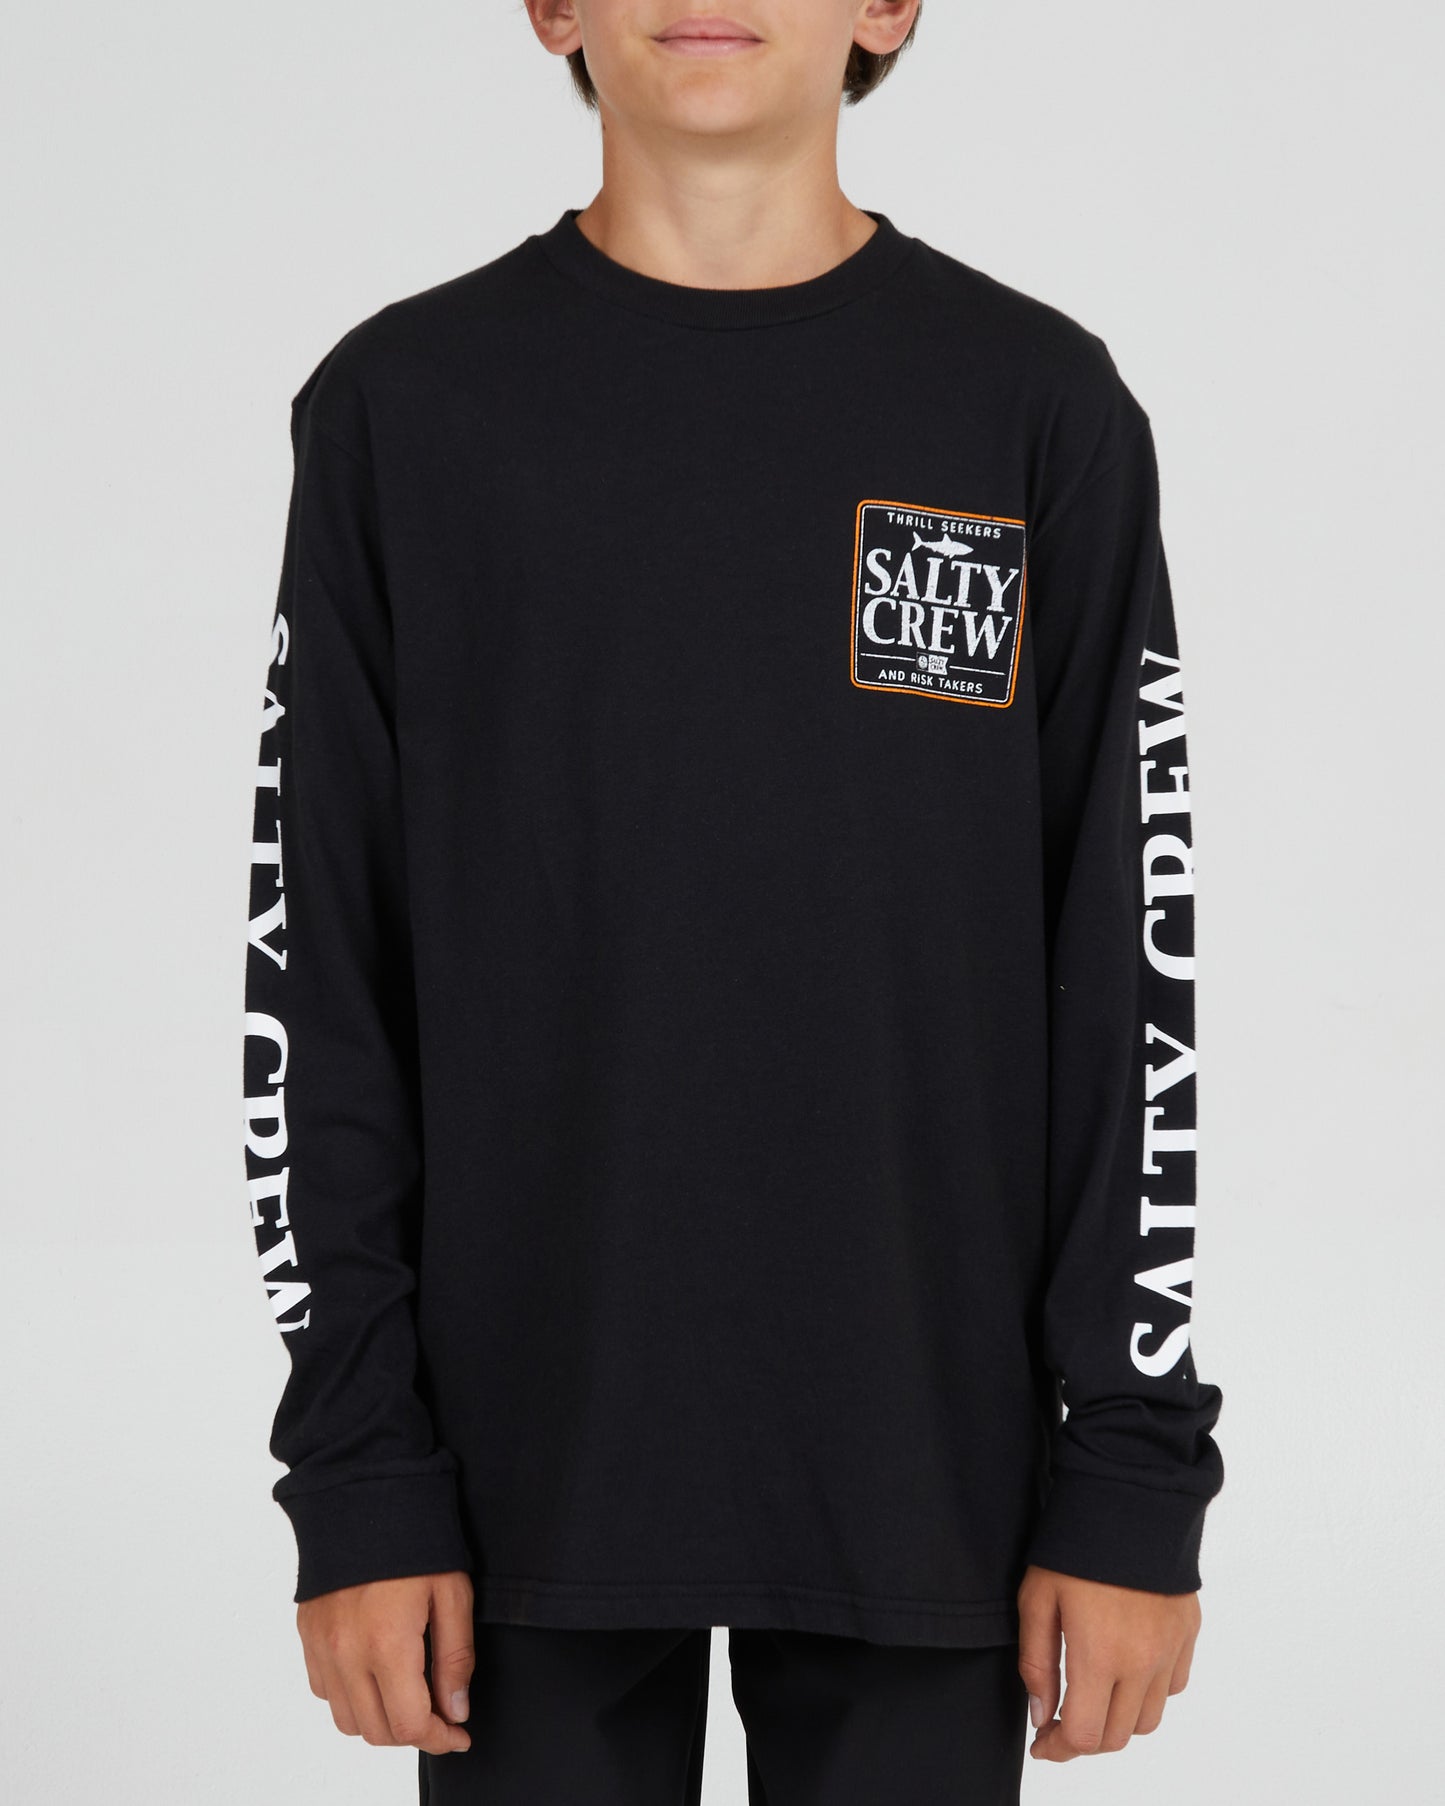 On body front of the Coaster Boys Black L/S Tee